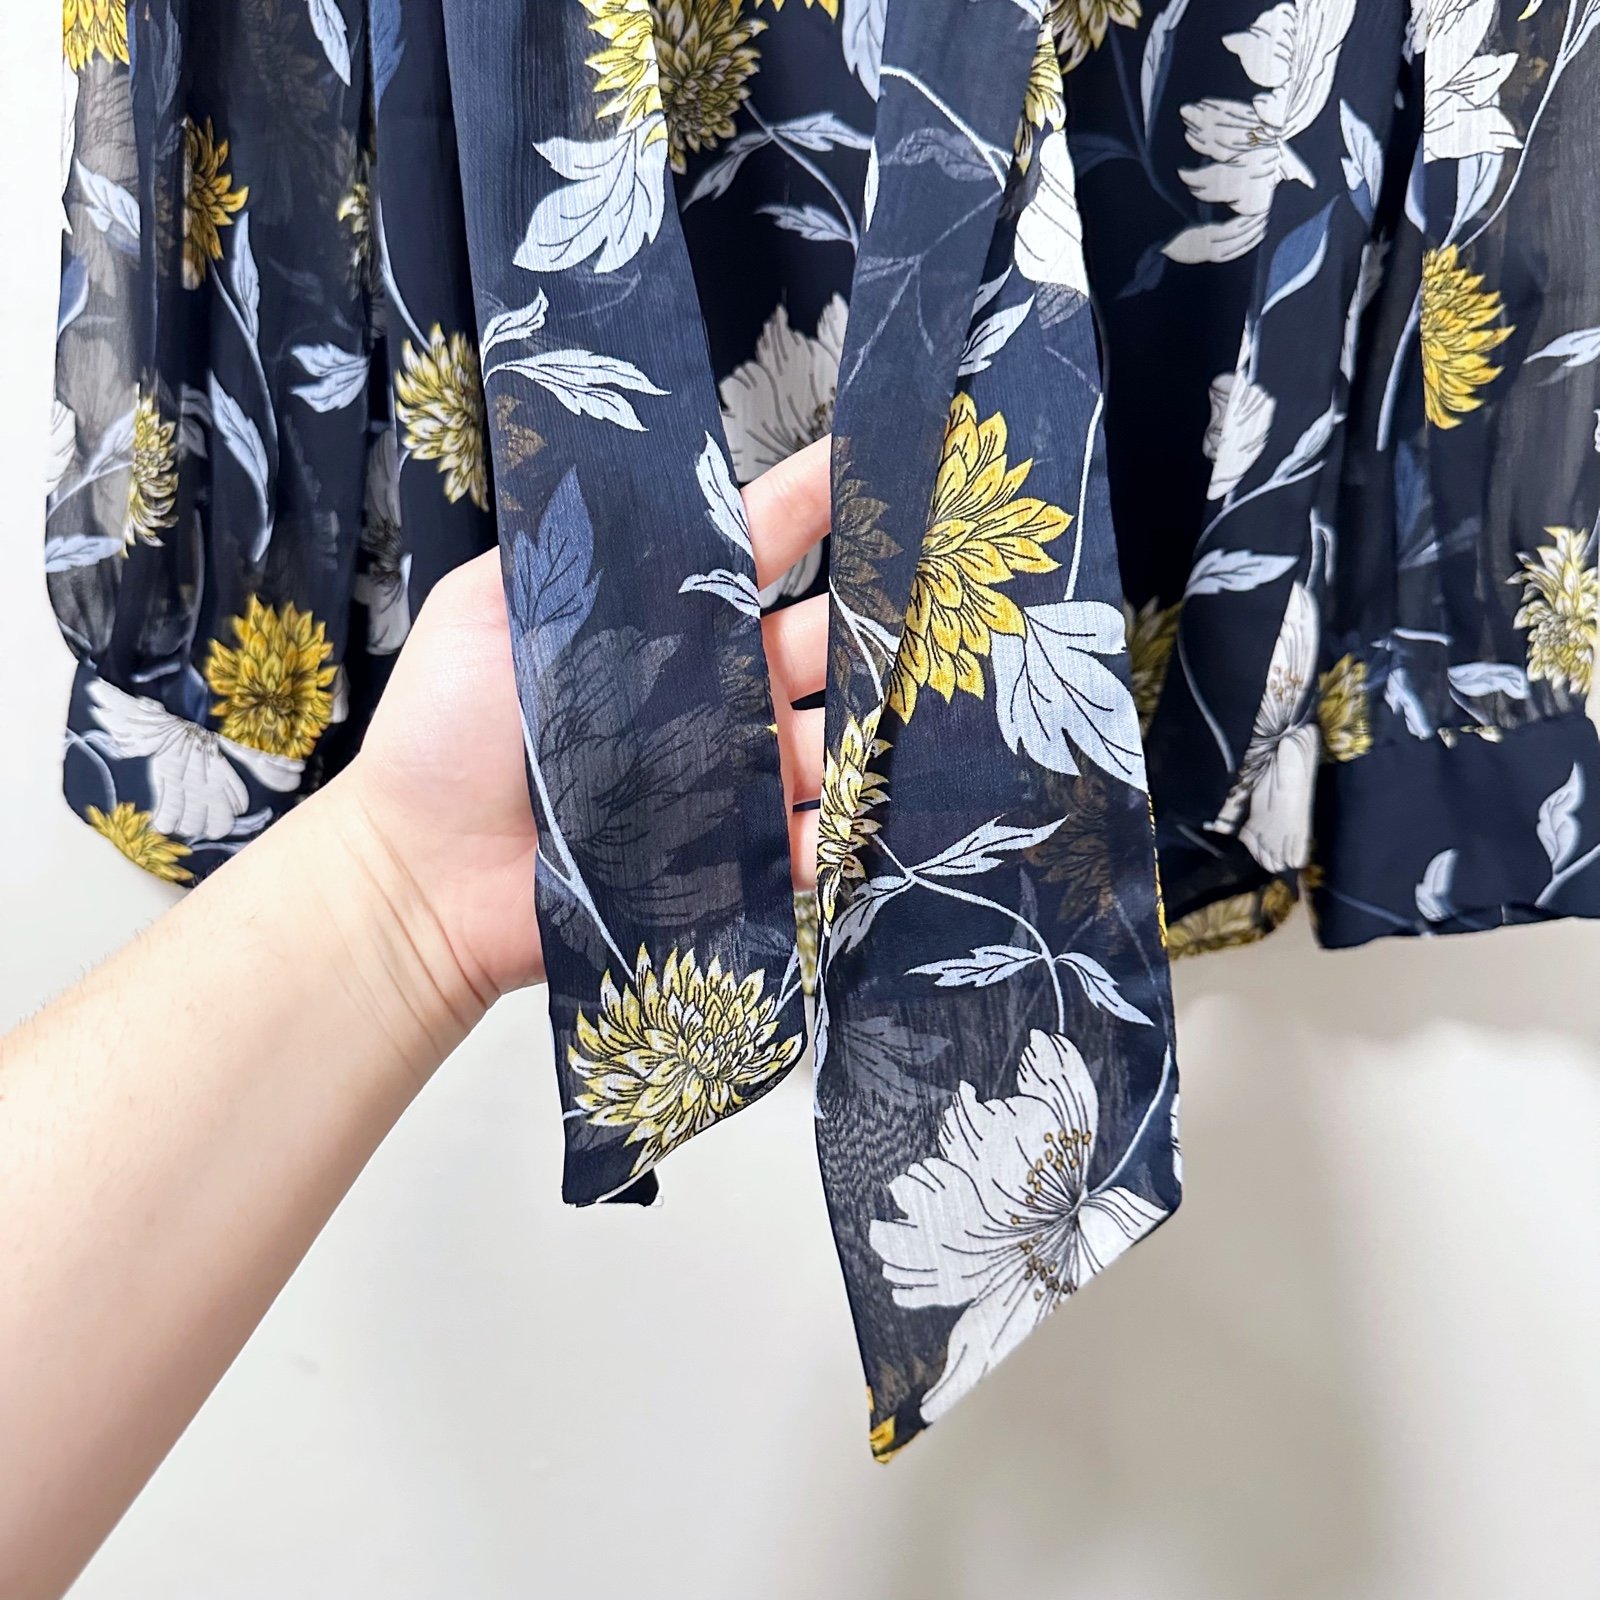 Wholesale price Ann Taylor Navy & Yellow Tie Front Flowy Floral Career Wear Office Blouse Small P7qUsnbOD well sale